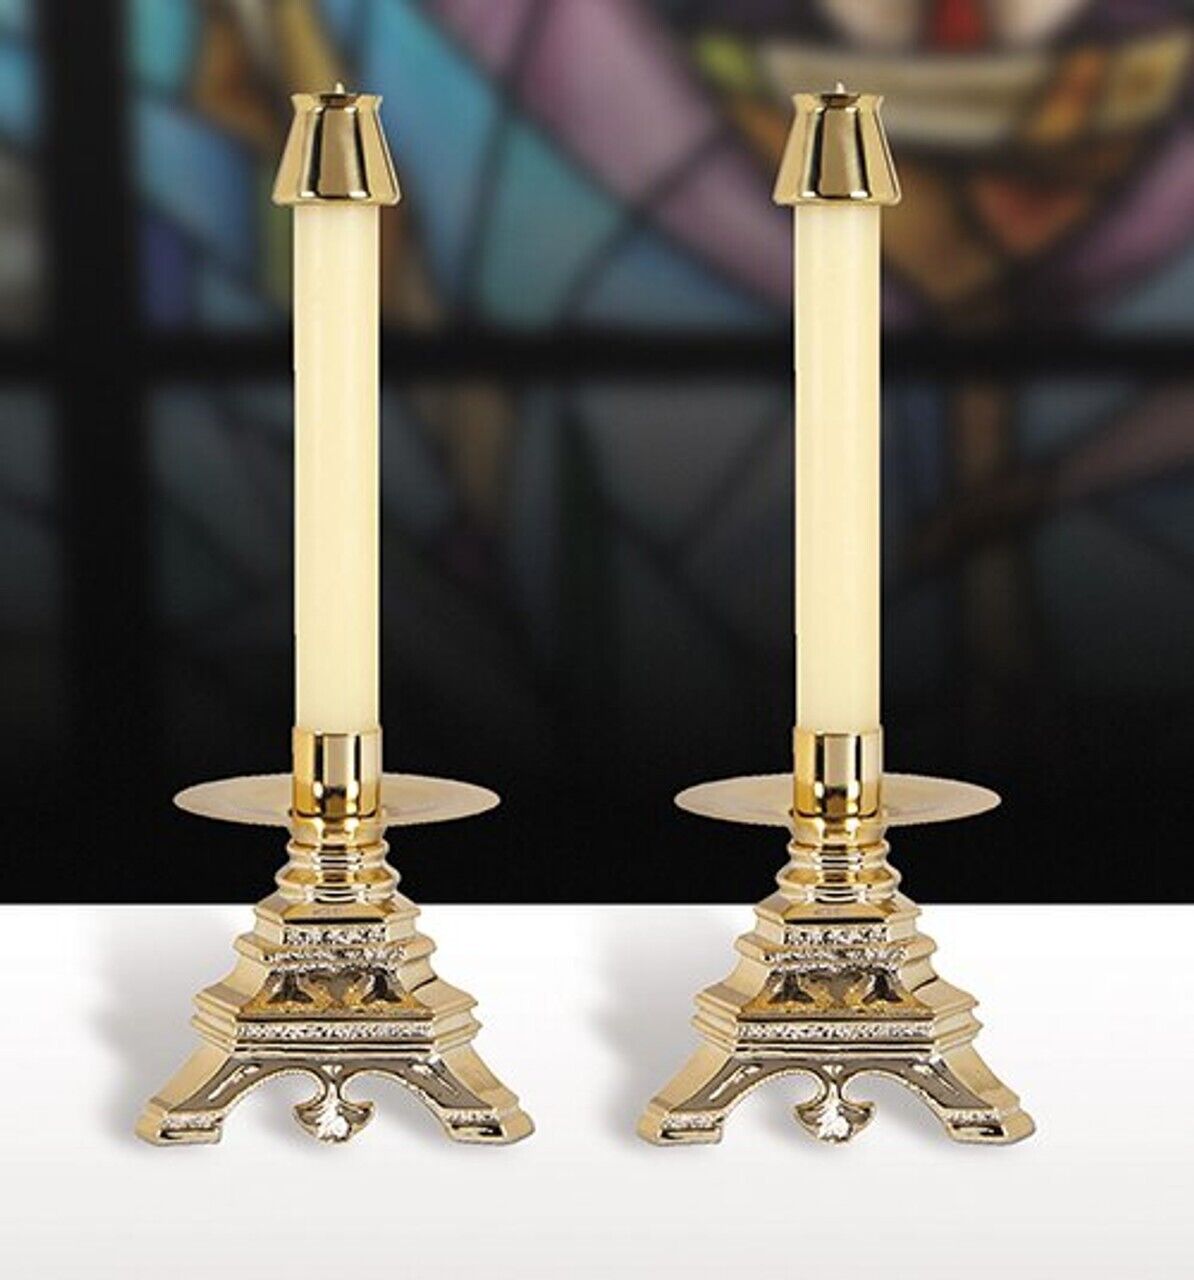 Resin Versailles Series Set of 2 Candleholders For Church or Sanctuary 6 1/2 In